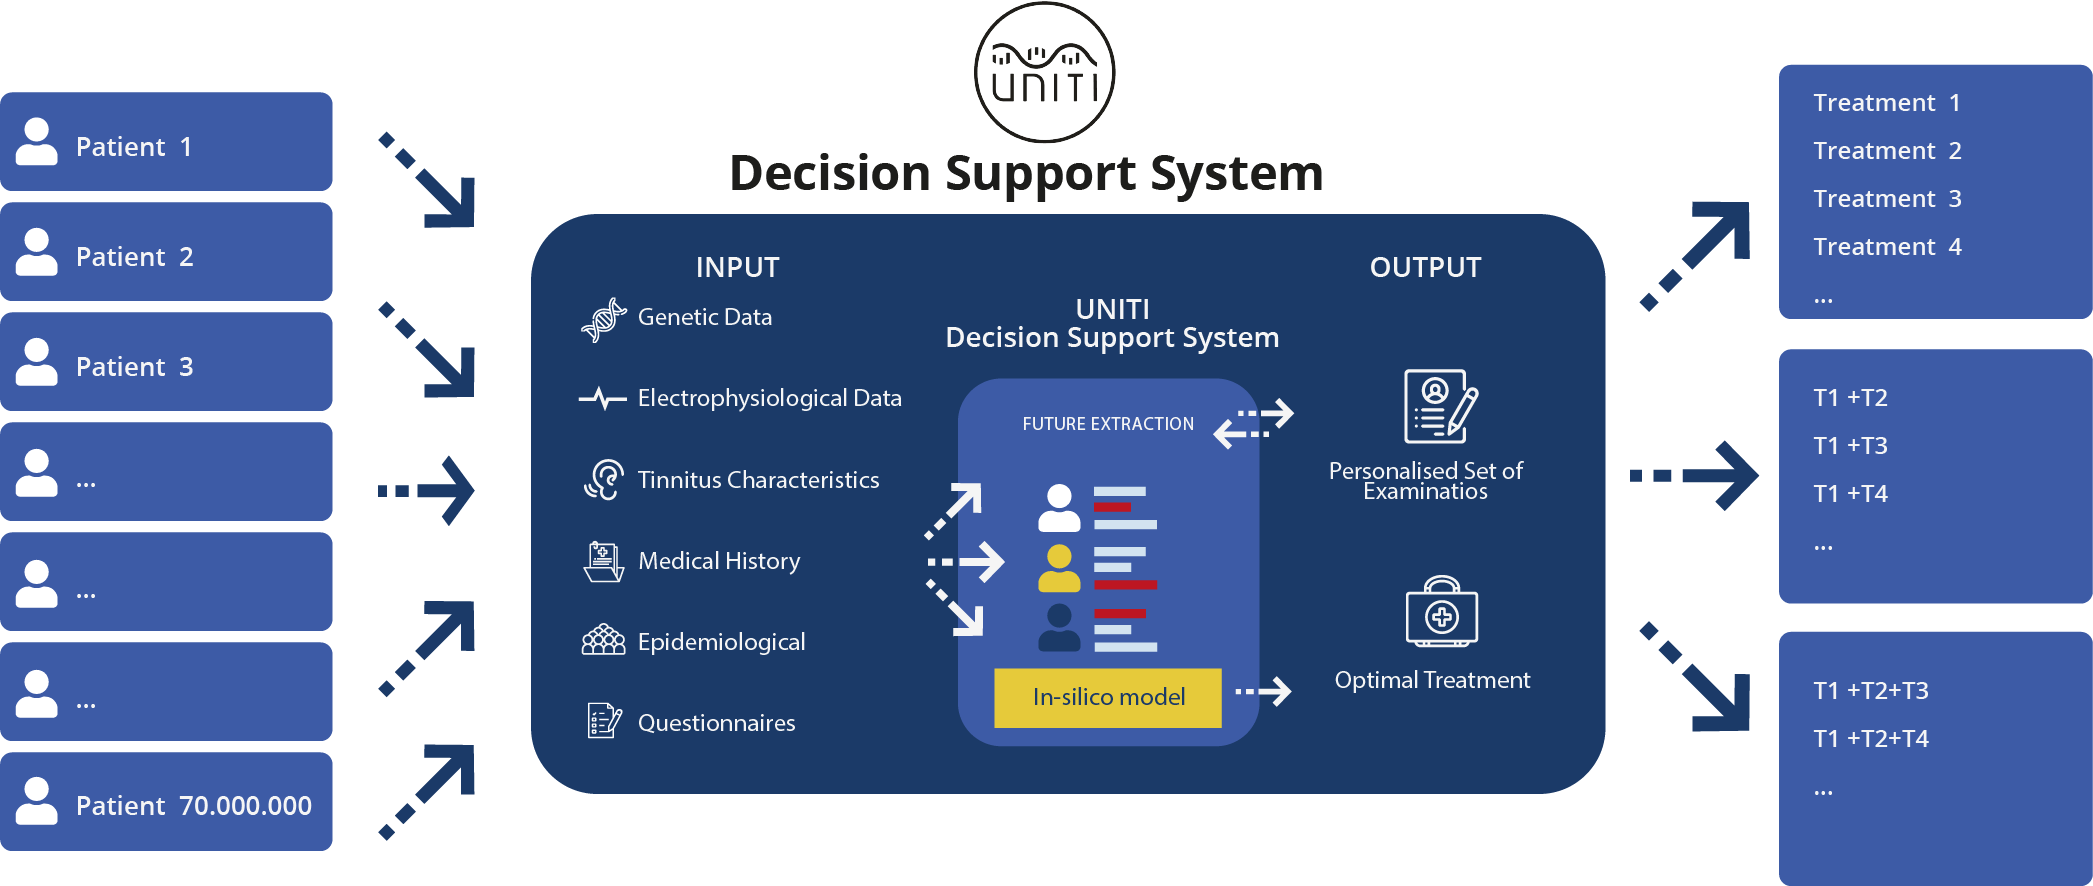 Decision Support System Model